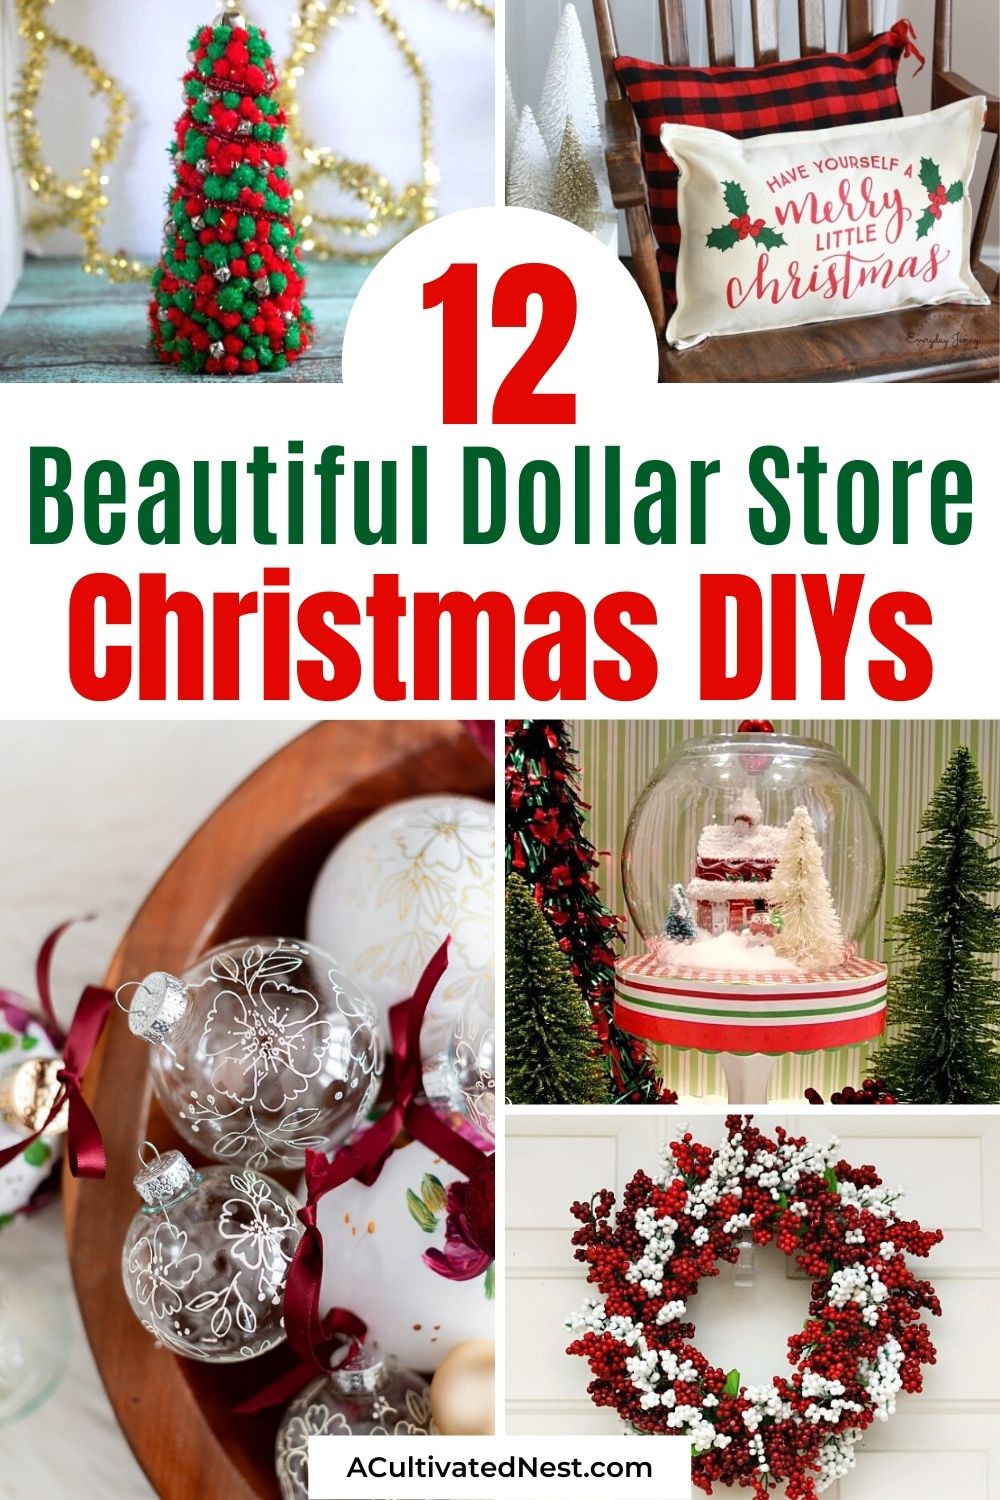 12 Amazing DIY Dollar Store Holiday Decorations- If you want to decorate your home for Christmas on a budget, then you'll love these DIY dollar store holiday decorations and crafts! | #ChristmasDecor #holidayDecorations #holidayCrafts #DIY #ACultivatedNest